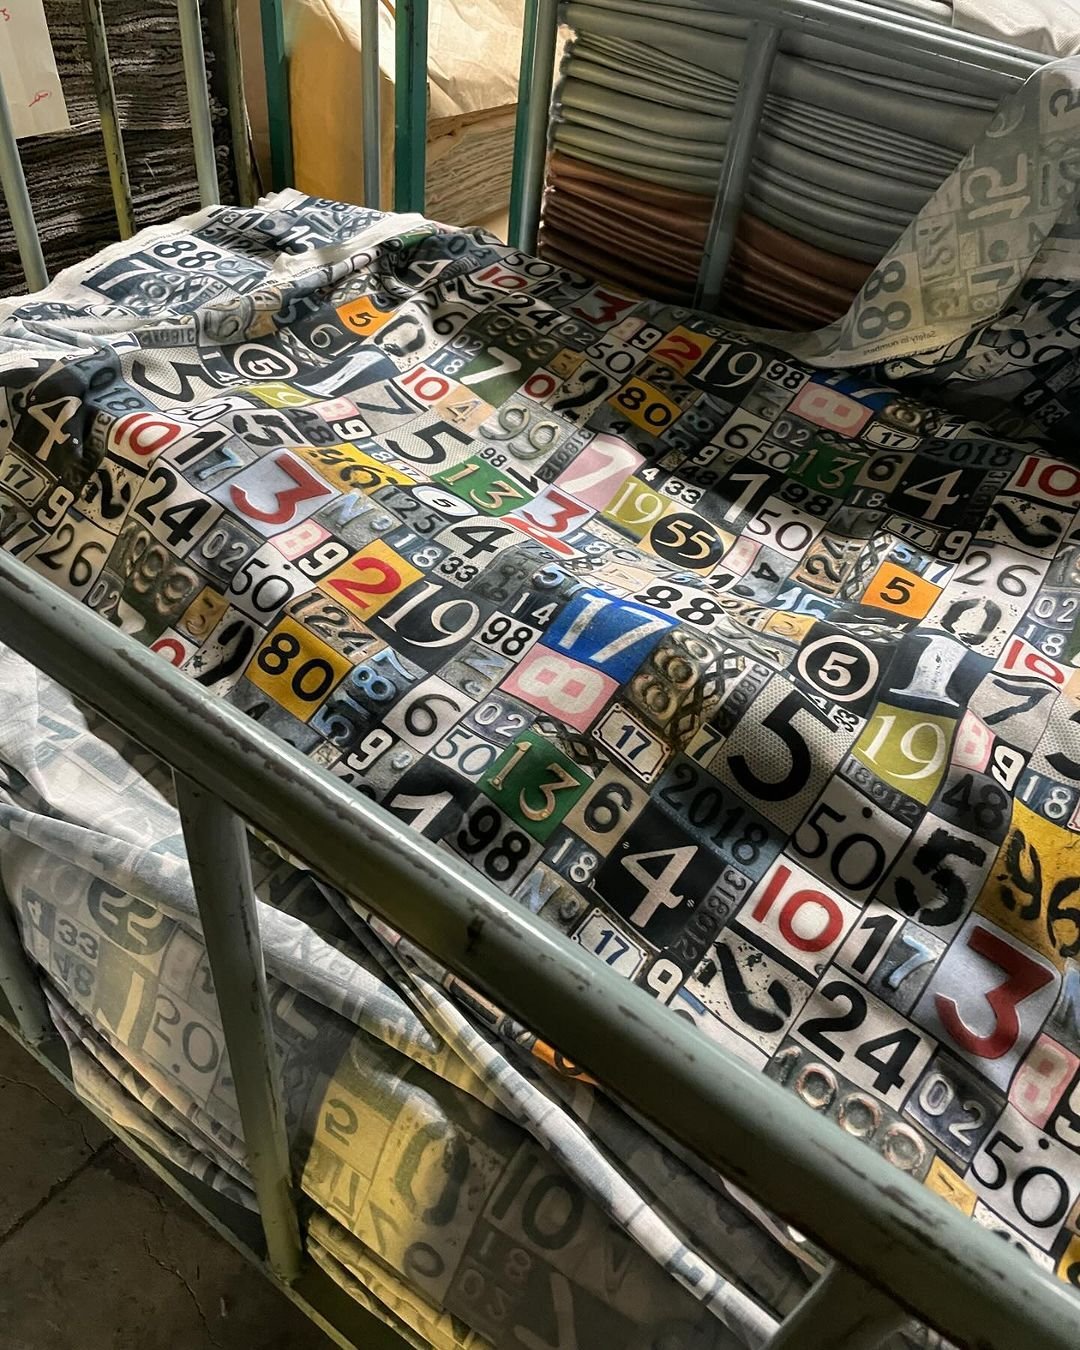 Our vibrant 'Day Trip' colourway of Safety in Numbers as it nears completion has been beautifully photographed by the @setouchidenimcompany at a recent factory visit. The fabric is lovingly printed in Japan and will be used as curtains! 

Fabric alwa